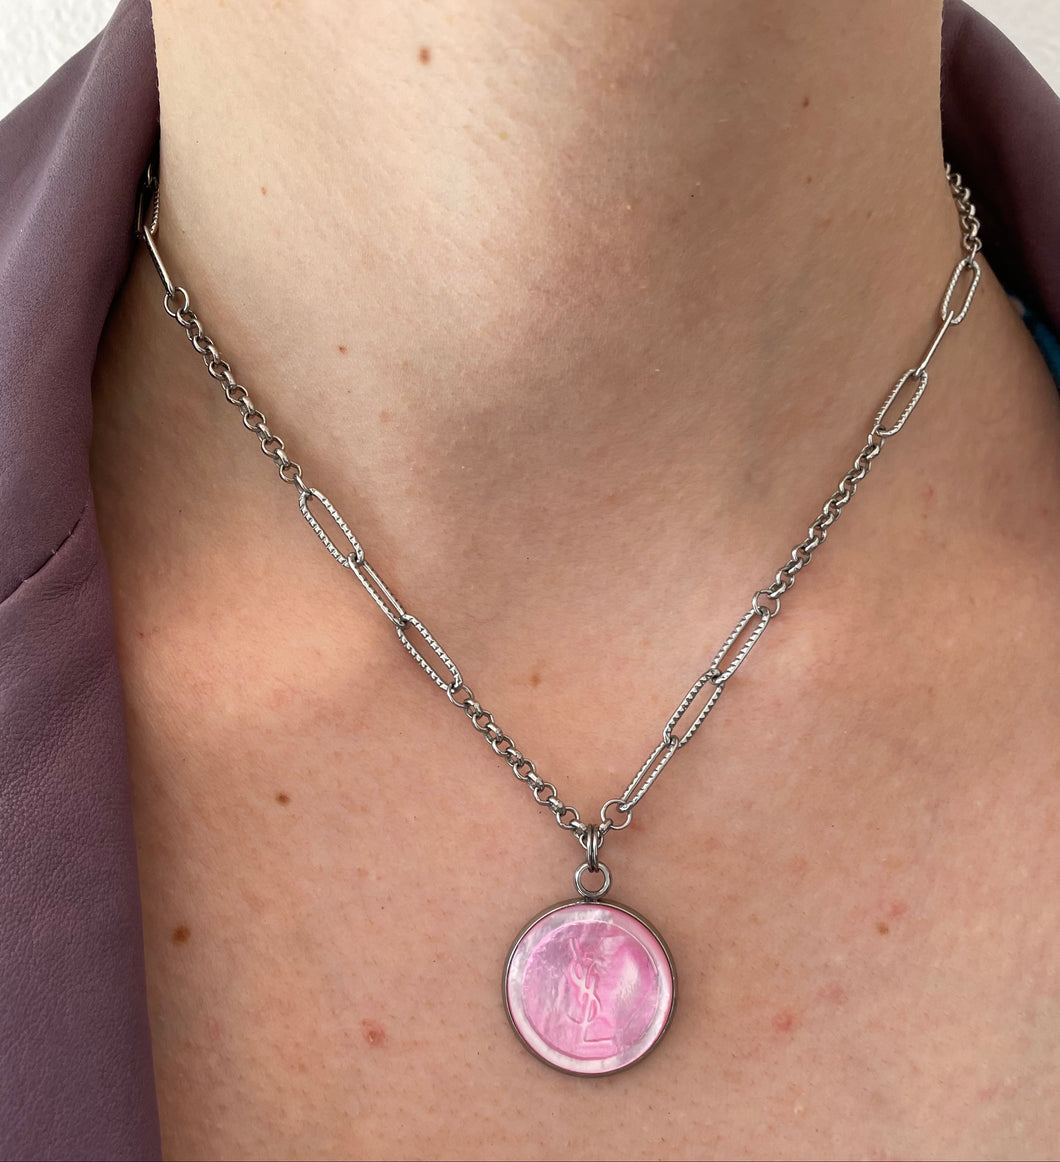 Collier upcyclé pink panther nacre YSL